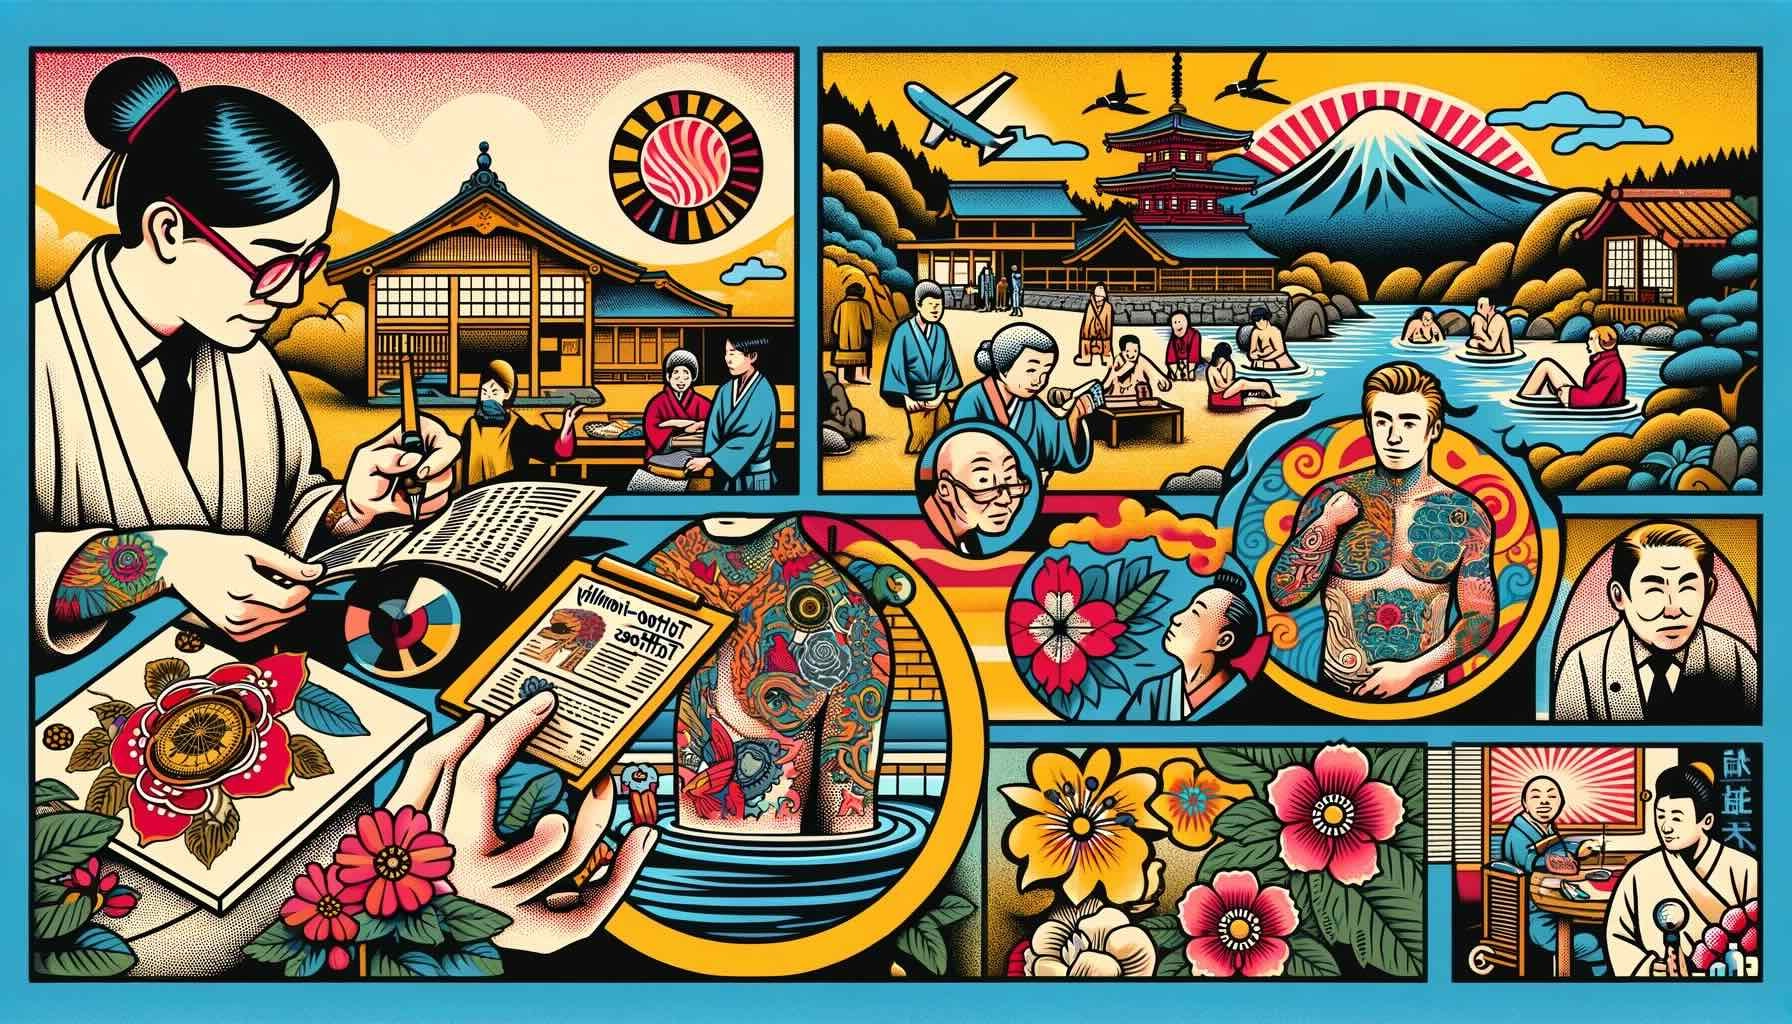 Special considerations for tattooed guests at Japanese onsens highlights the challenges and solutions for tattooed travelers, showcasing the cultural context and evolving attitudes towards tattoos in the onsen culture.